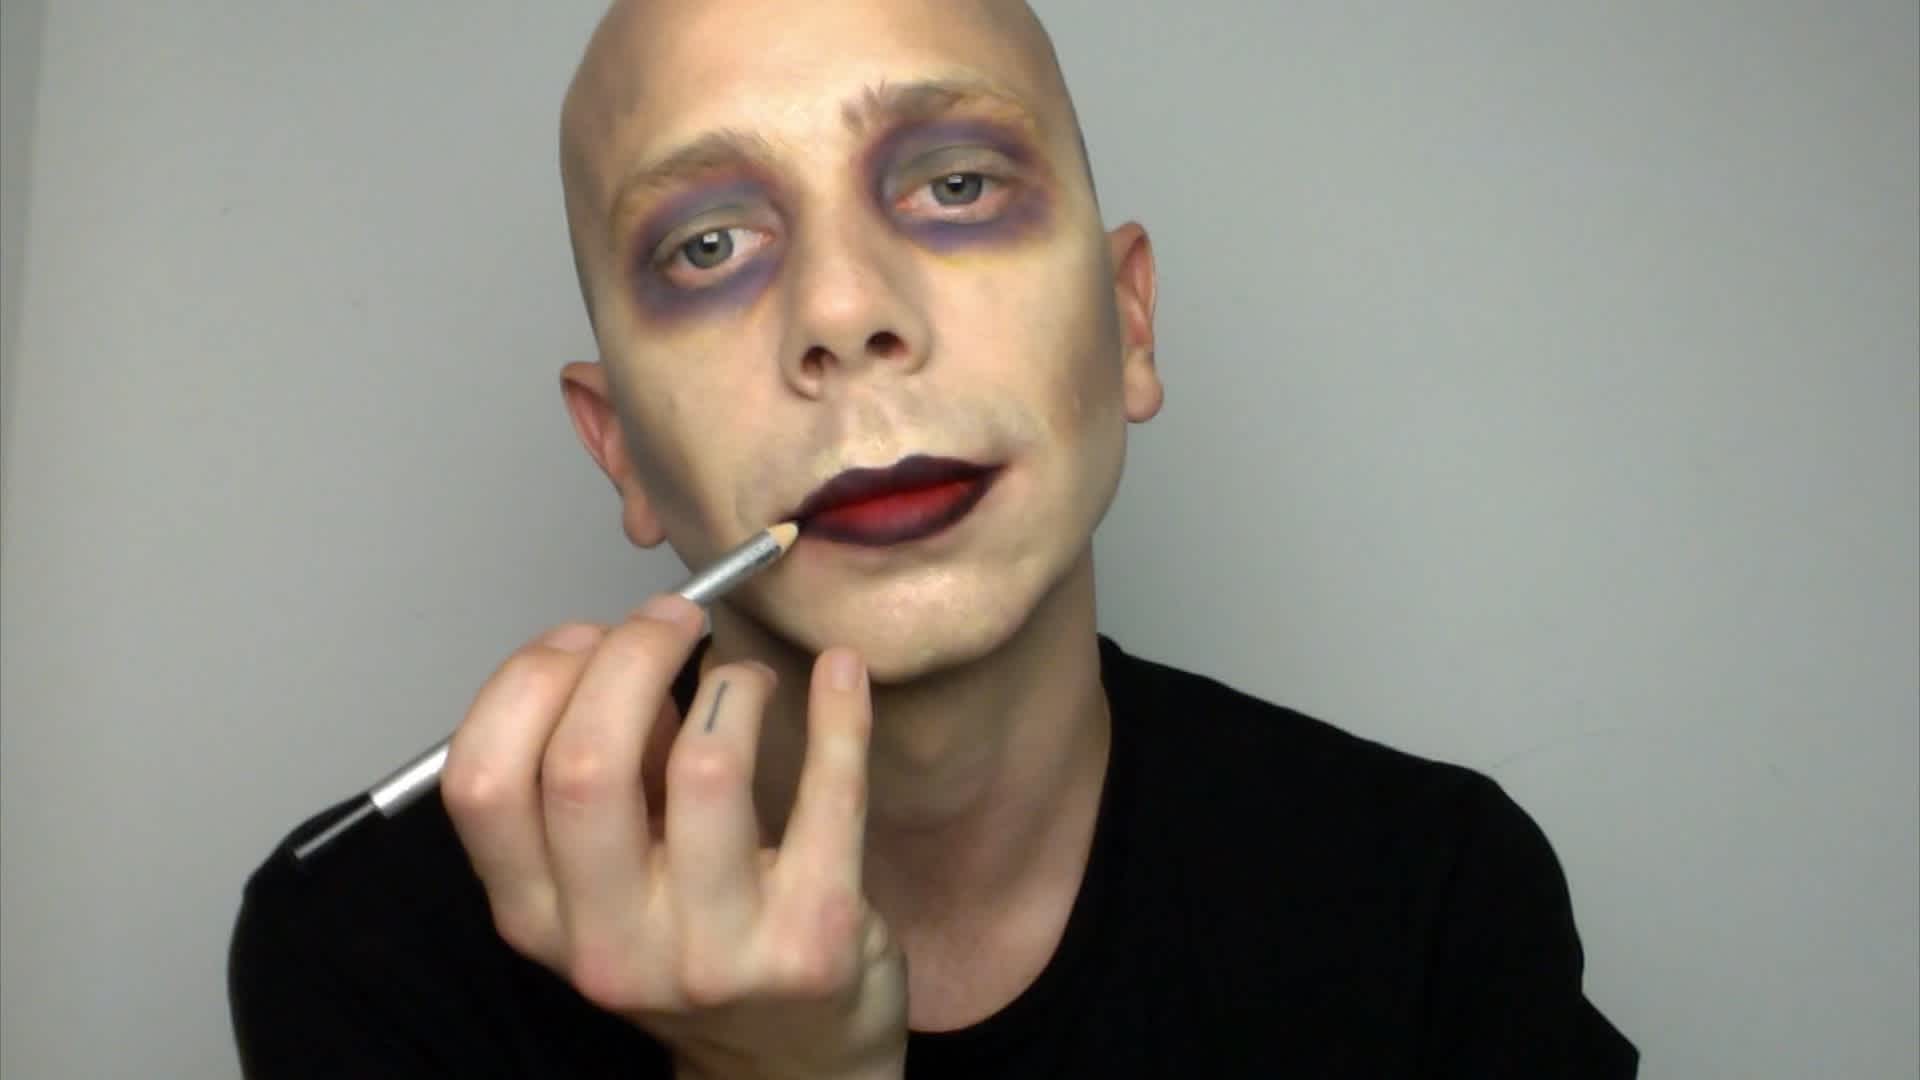 Makeup Tutorial: How to Look Great Without Having to High-Five Straight Men photograph